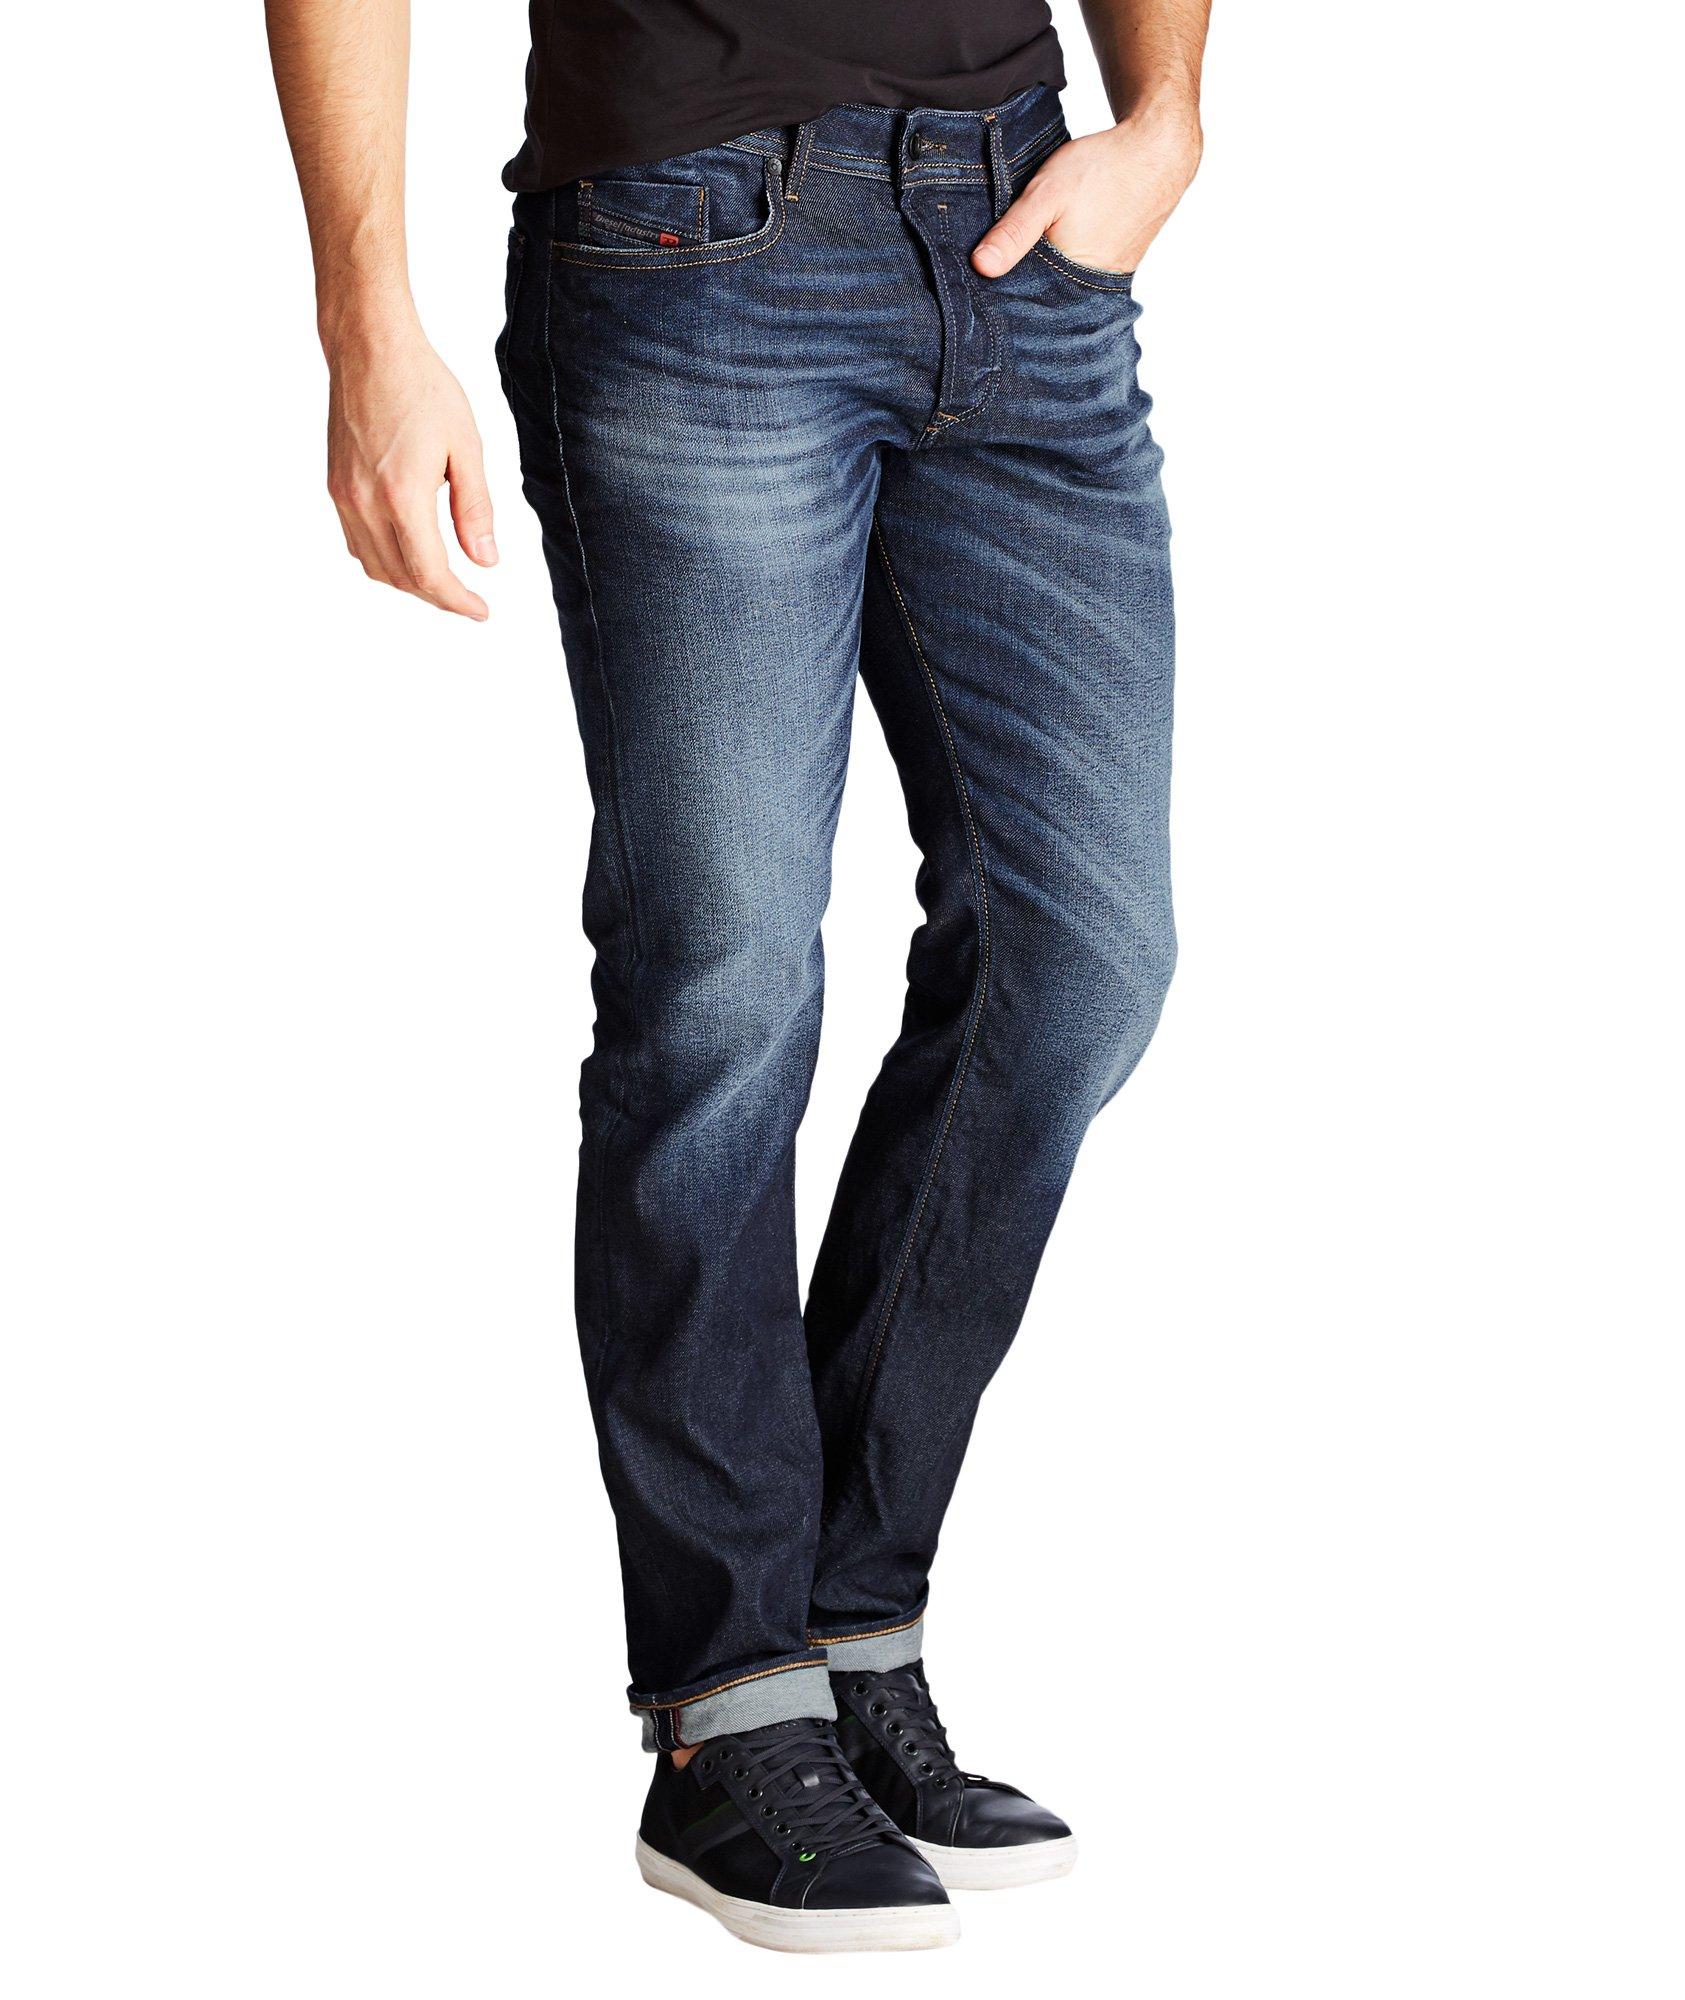 Buster Slim Fit Jeans image 0